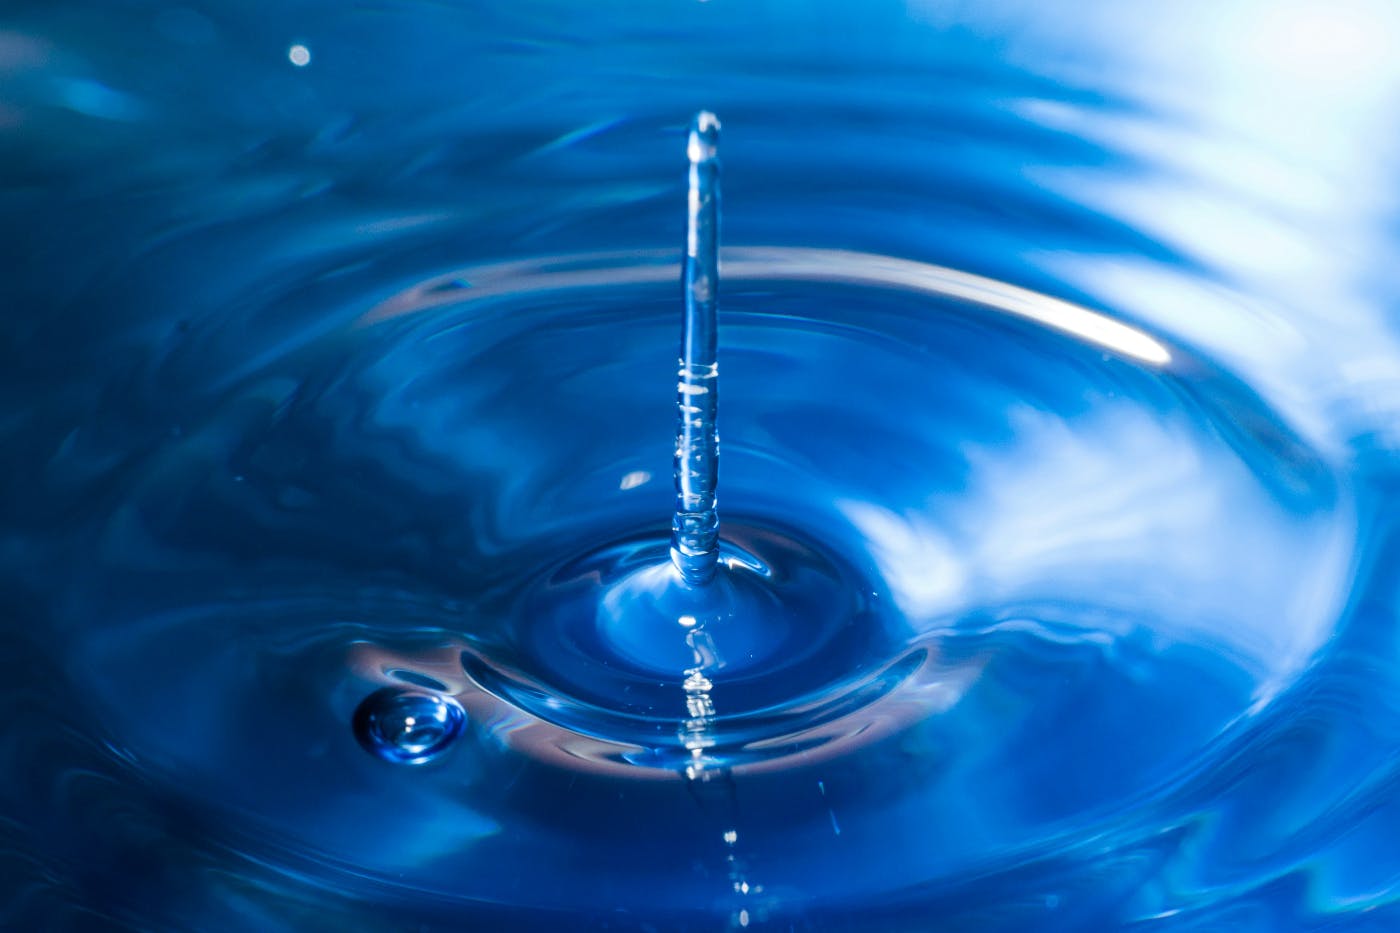 a water drop hitting and rebounding in a blue pool